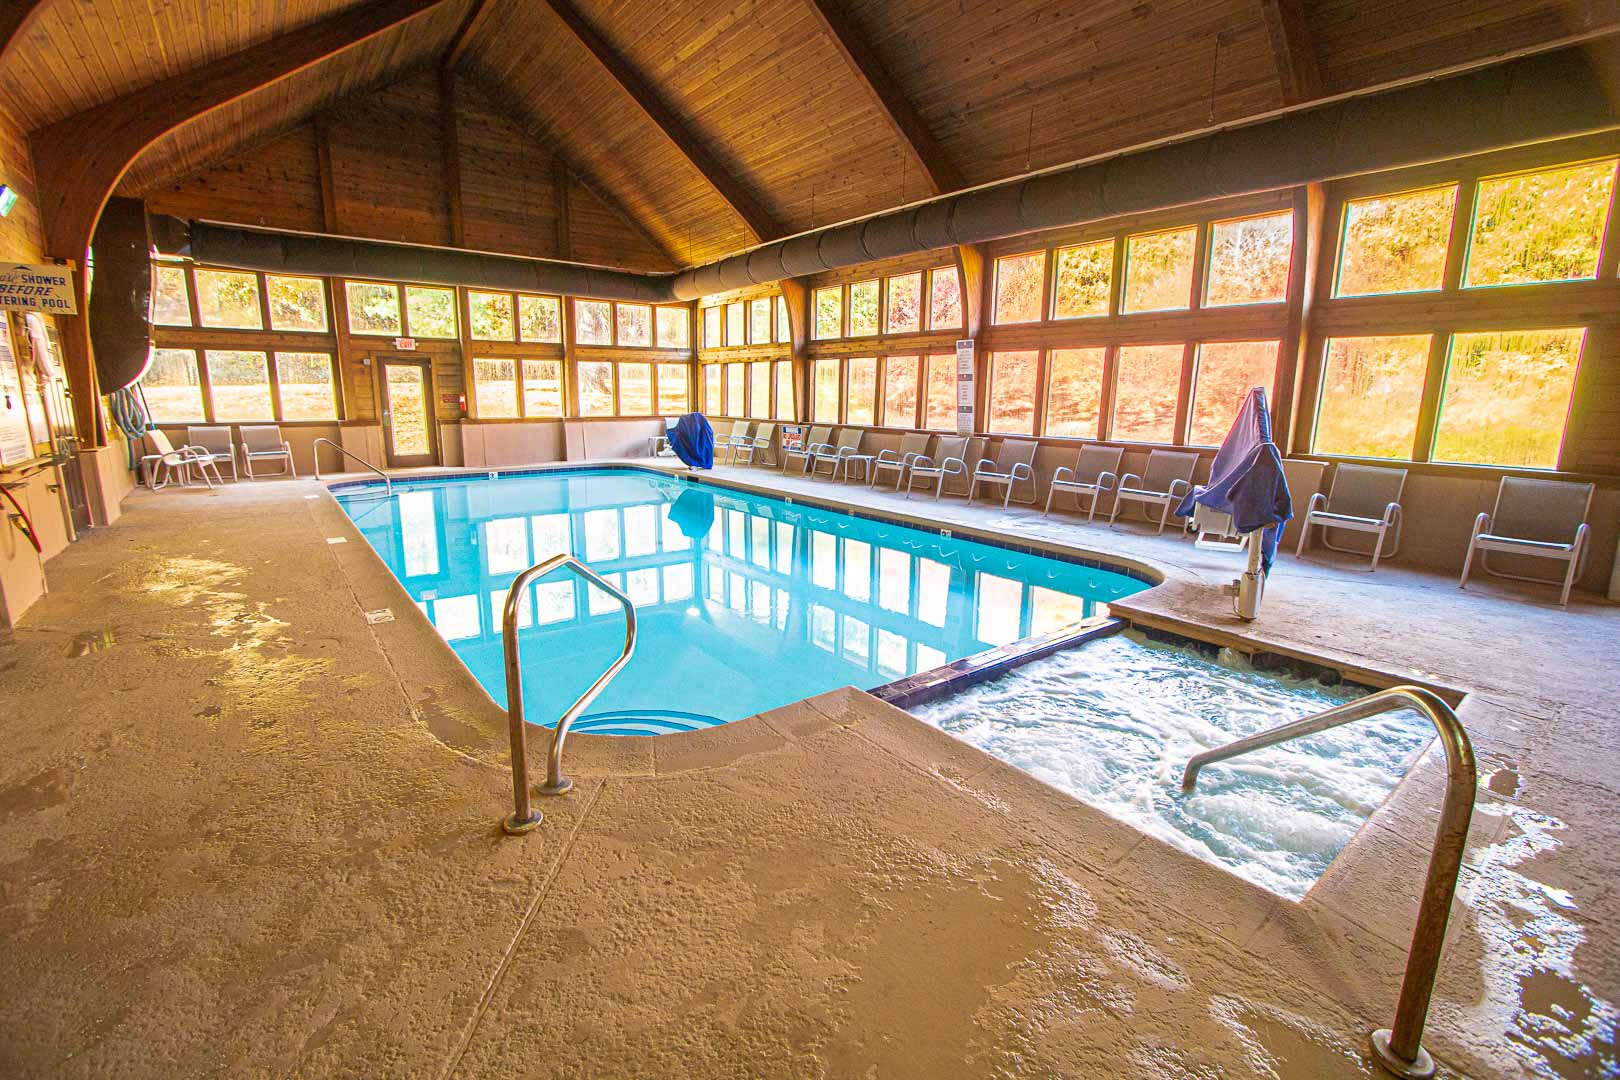 A spacious indoor swimming pool and Jacuzzi at VRI's Mountain Loft Resort in North Carolina.